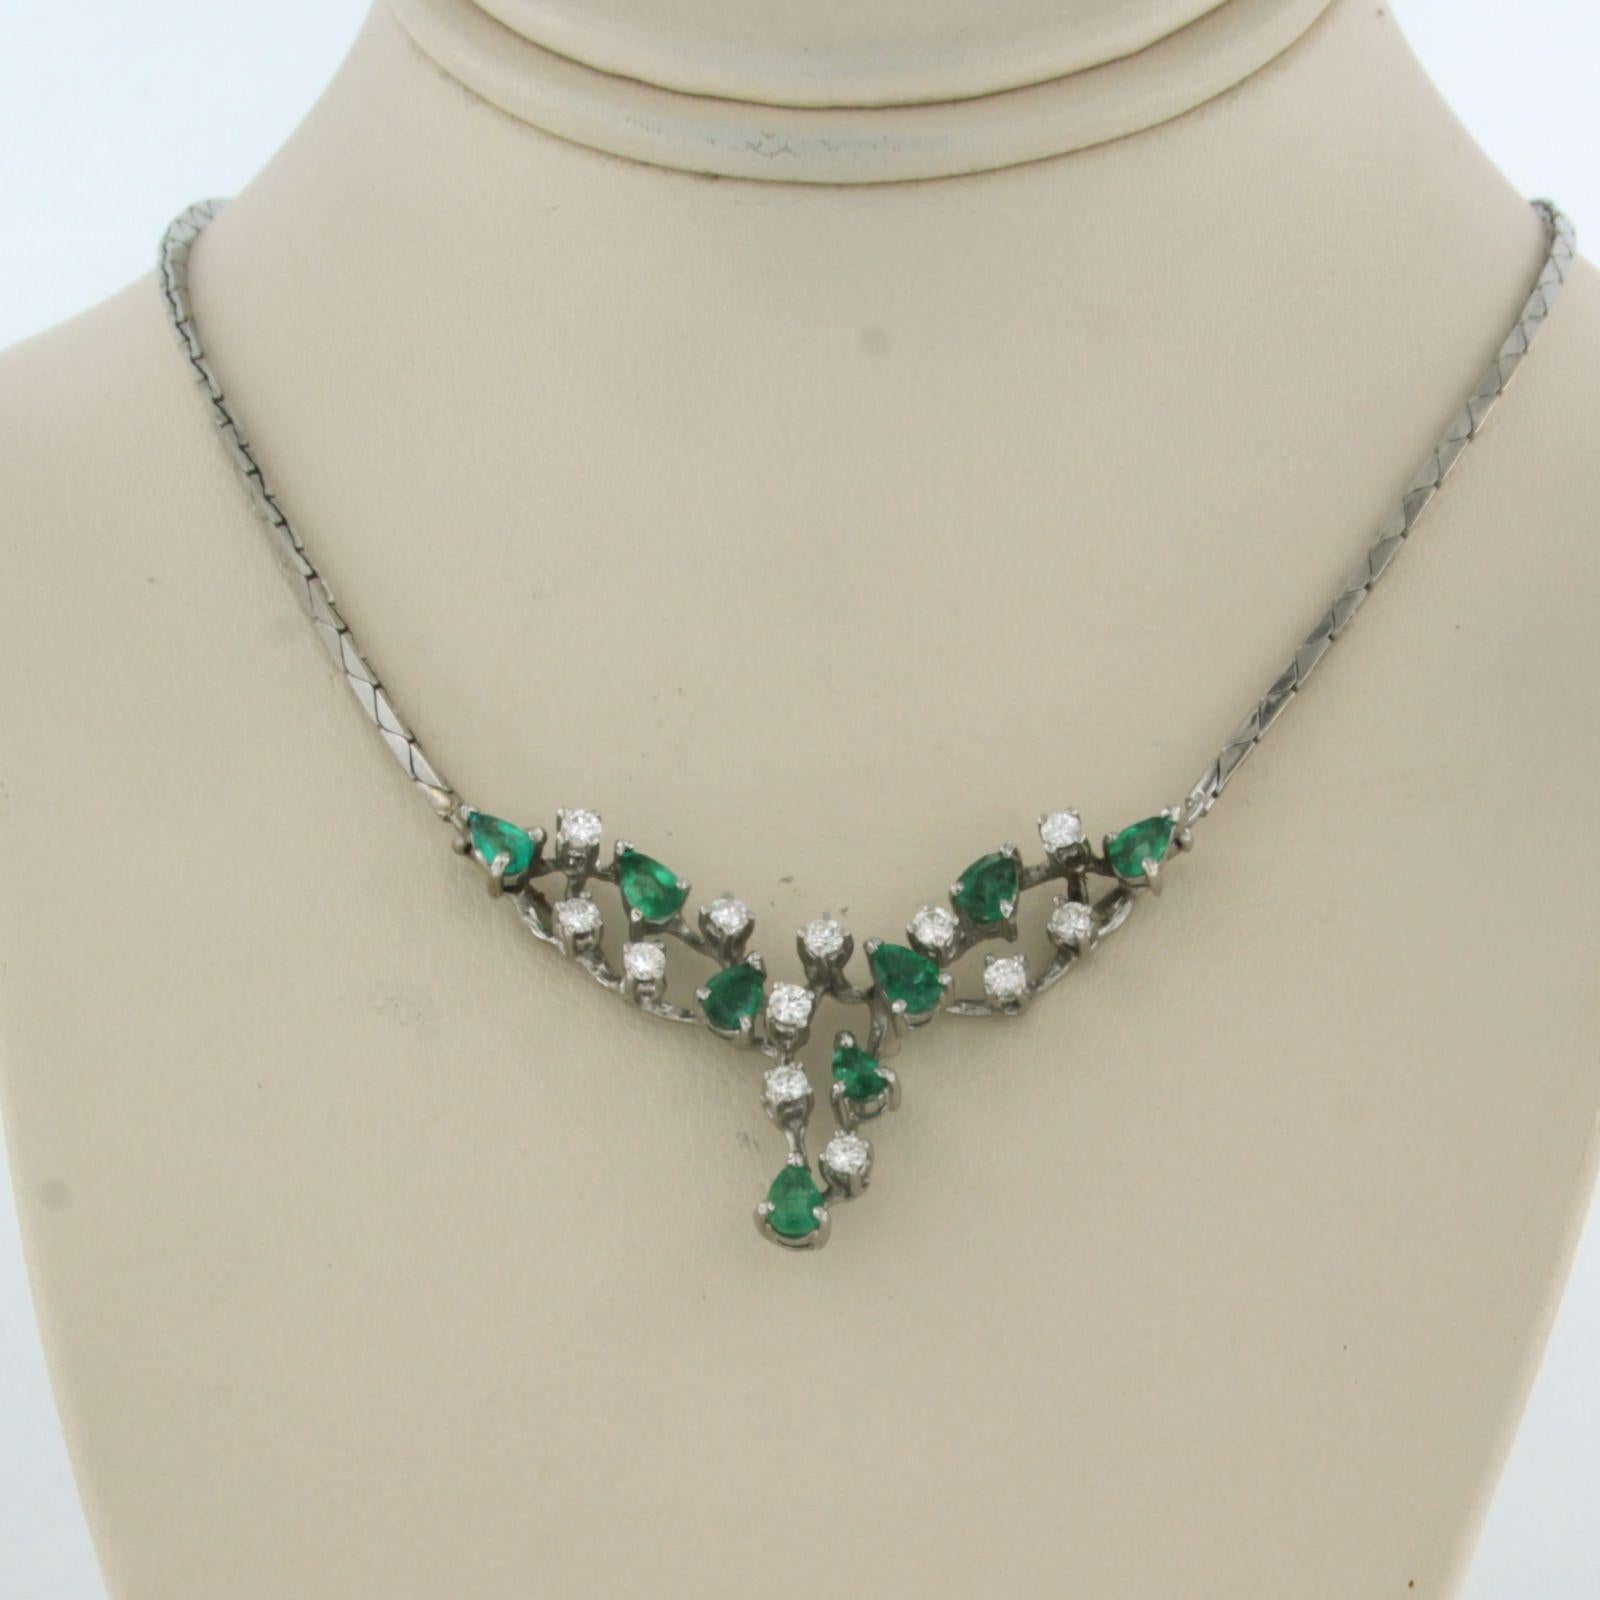 18k white gold necklace with emerald and brilliant cut diamond. 0.35ct - F/G - VS/SI - 50 cm long

Detailed description

the necklace is 50 cm long and 1.4 mm wide

The size of the middle part is 3.5 cm by 2.1 cm wide

total weight: 10.9